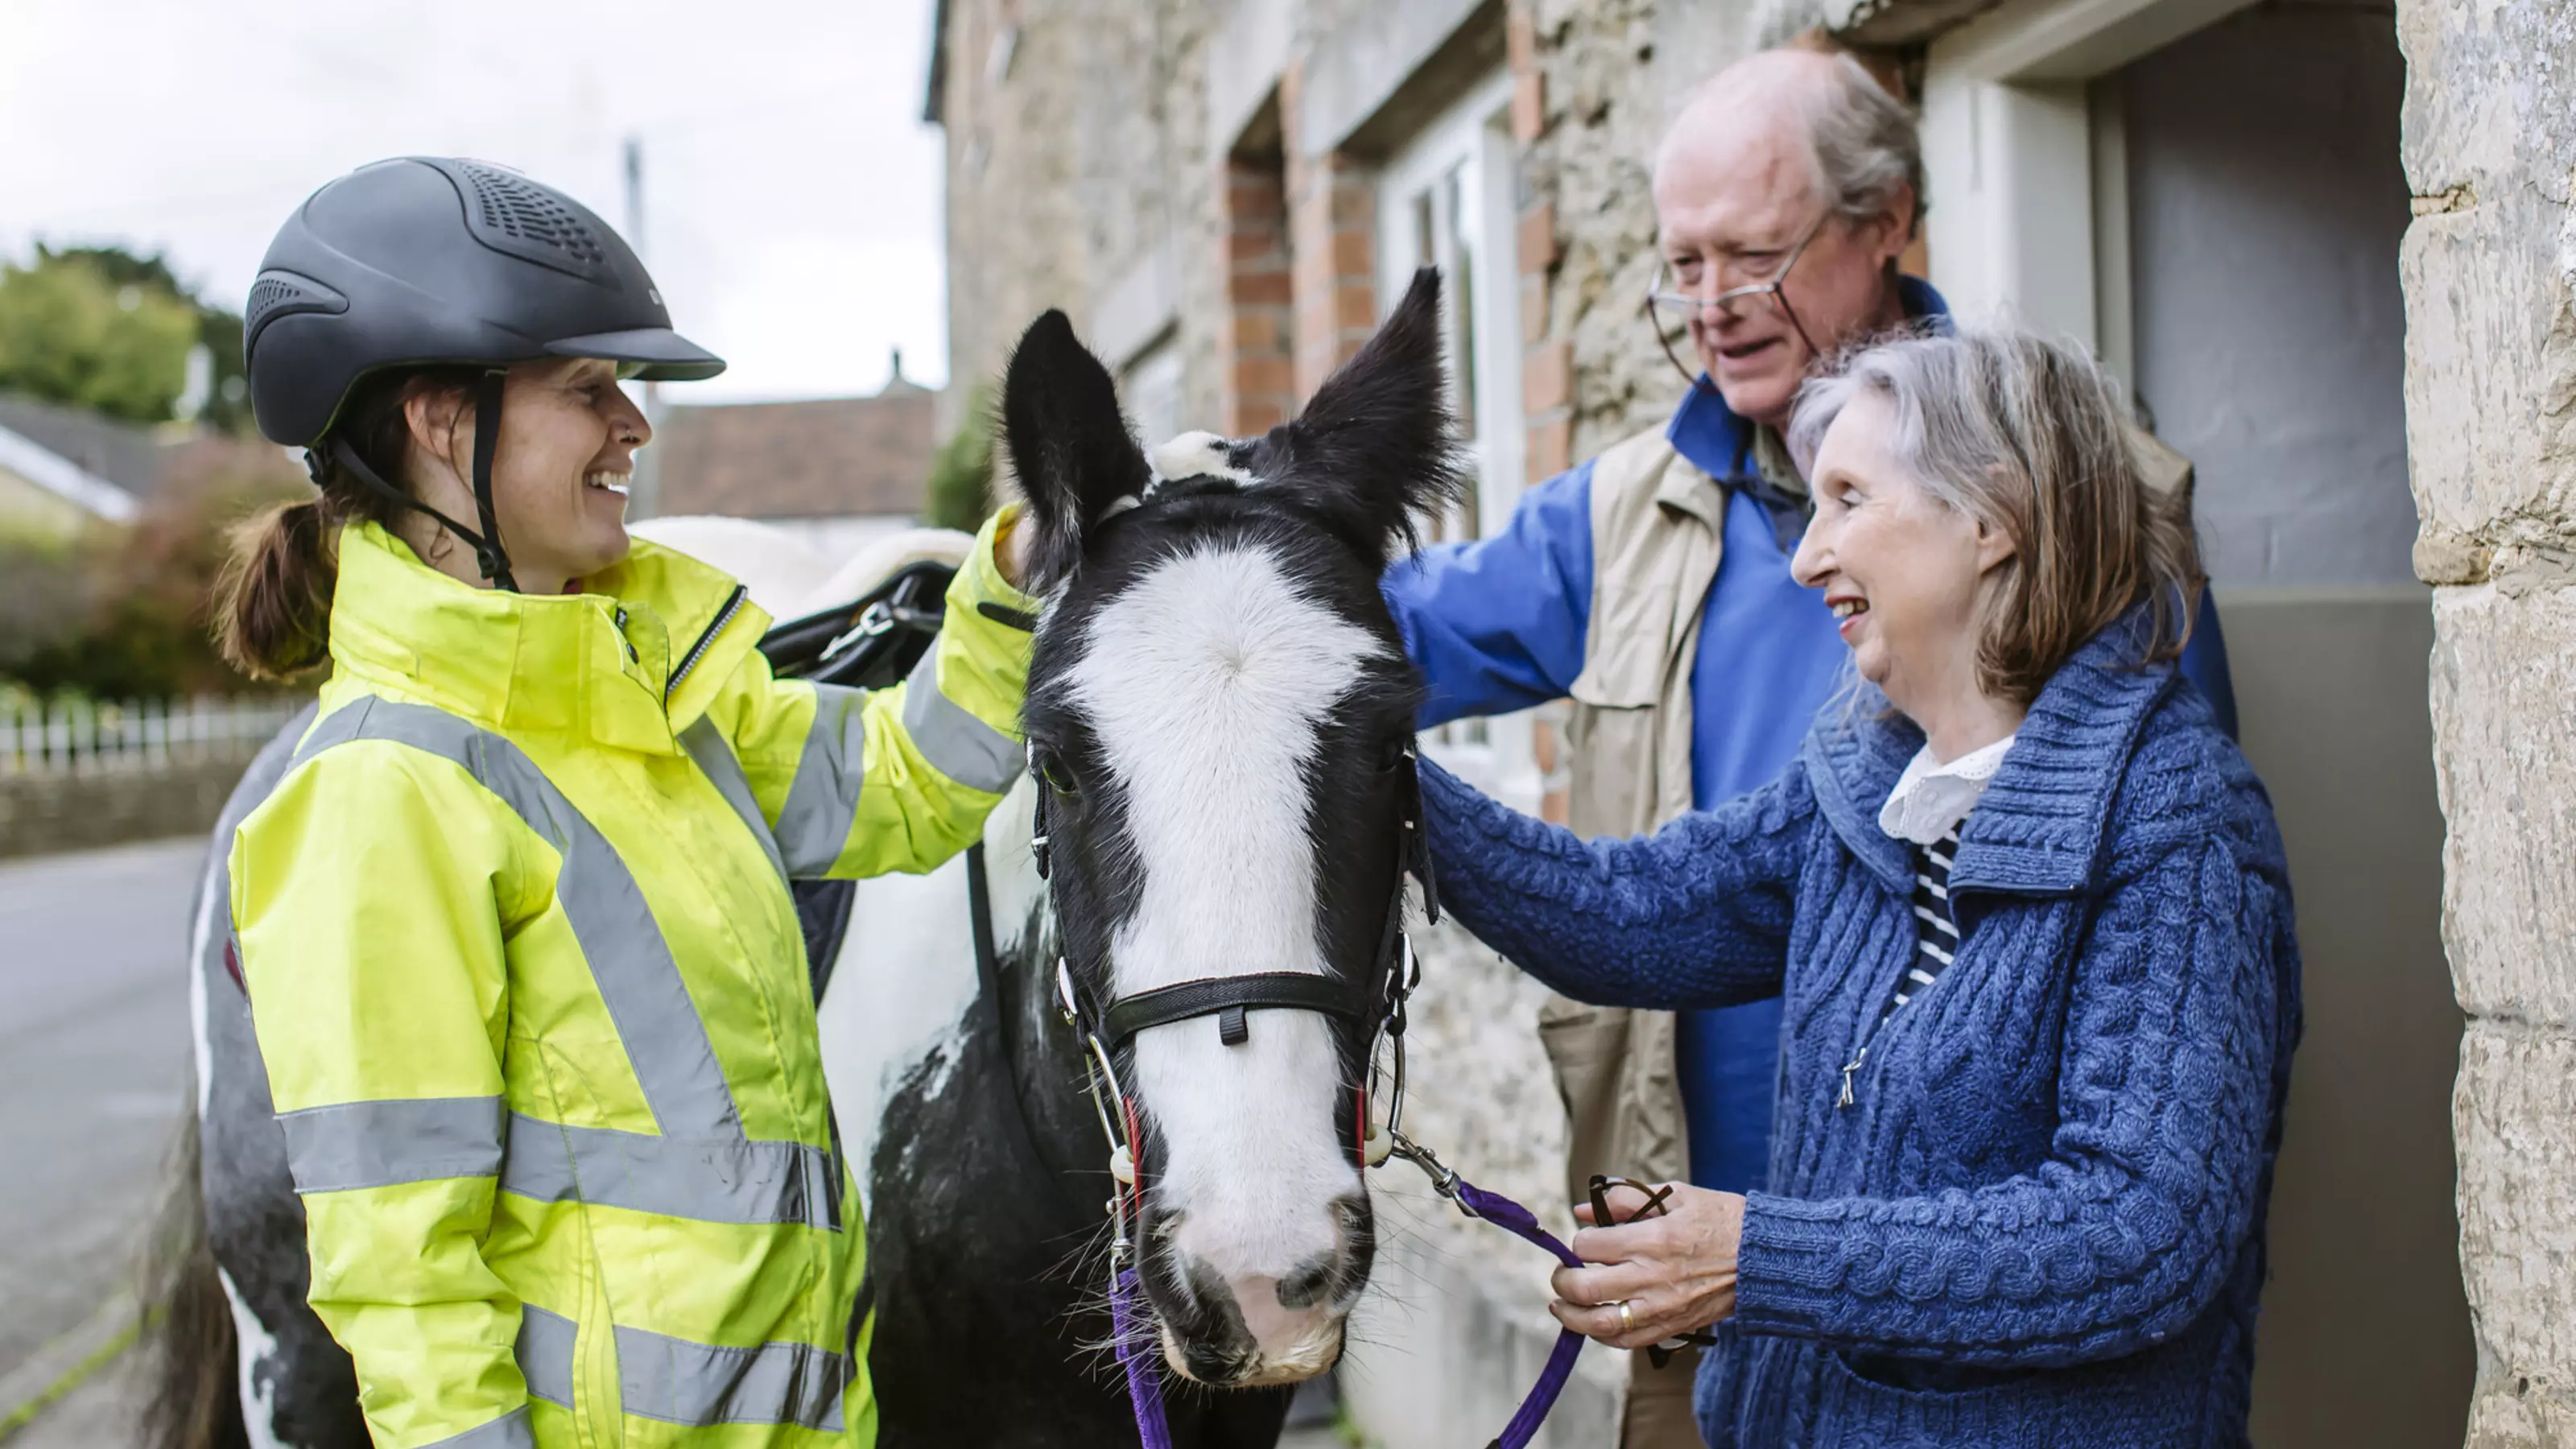 Black and white horse is stroked by woman and man outside their home